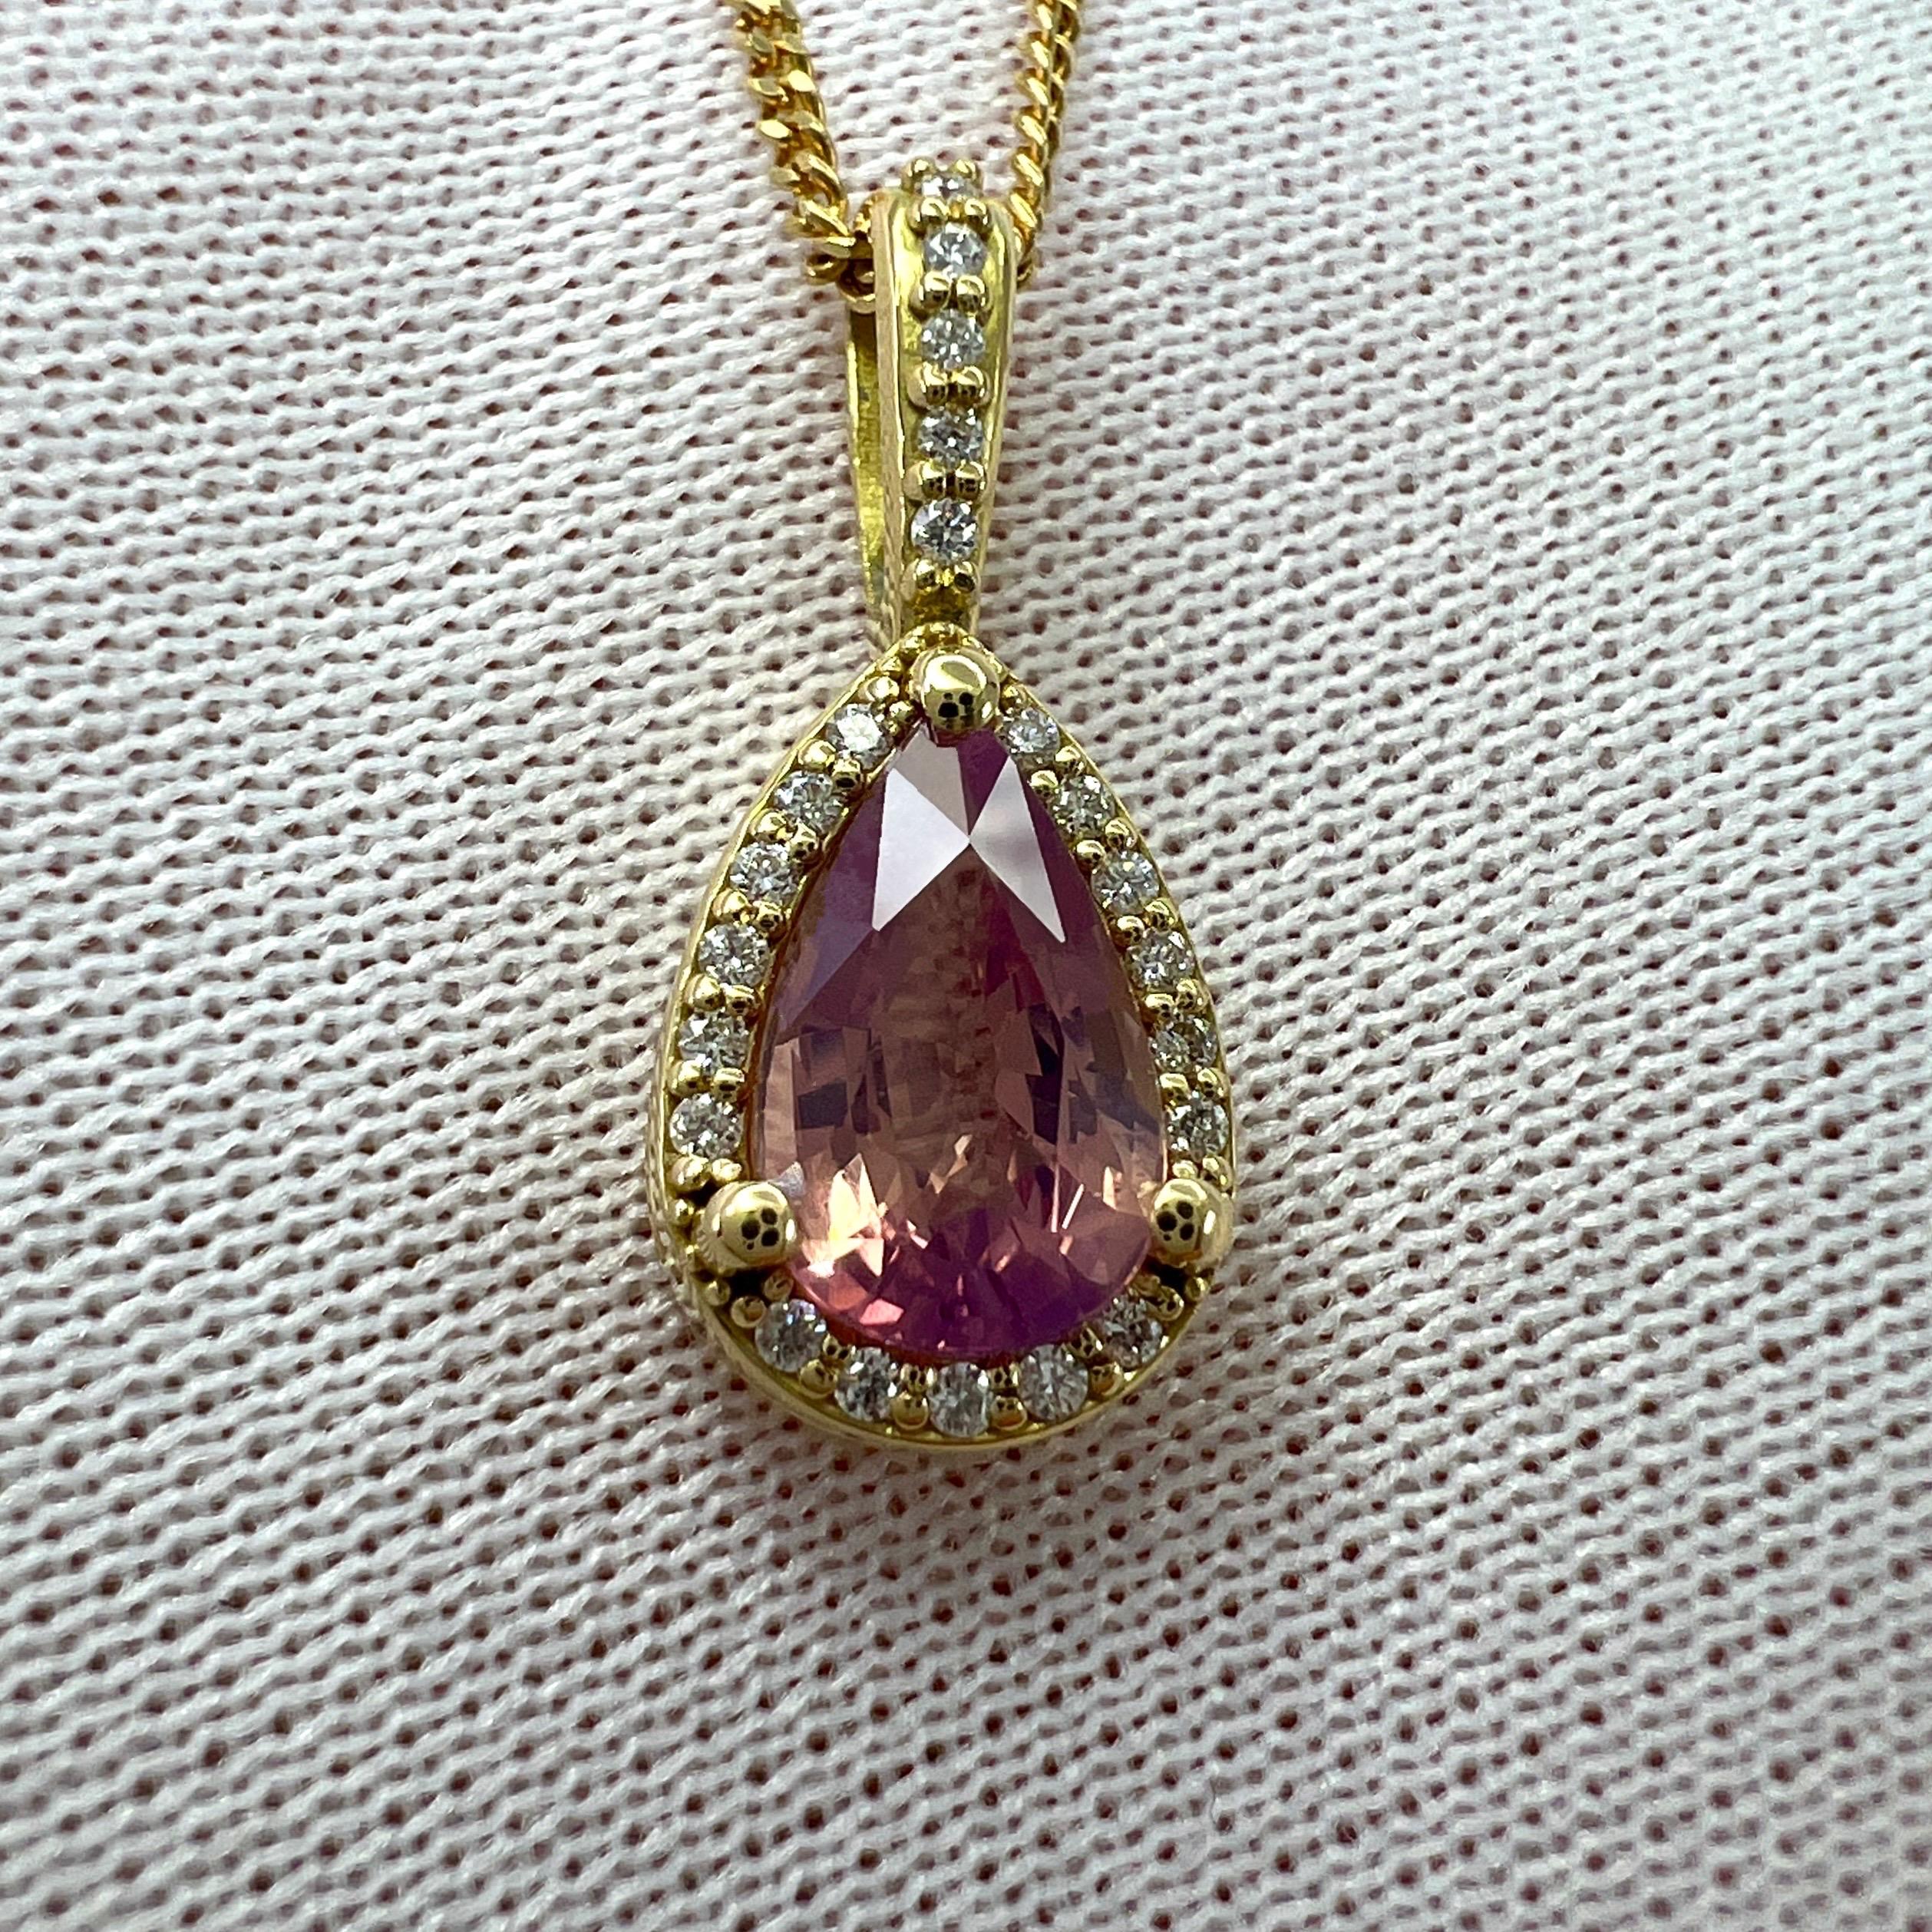 Fine Untreated Natural Pear Cut Pink Sapphire And Diamond 18k Yellow Gold Halo Pendant Necklace.

1.06ct GIA certified natural sapphire with a fine bright pink colour with subtle orange undertones. Often called 'padparadscha' in the trade. 
Top